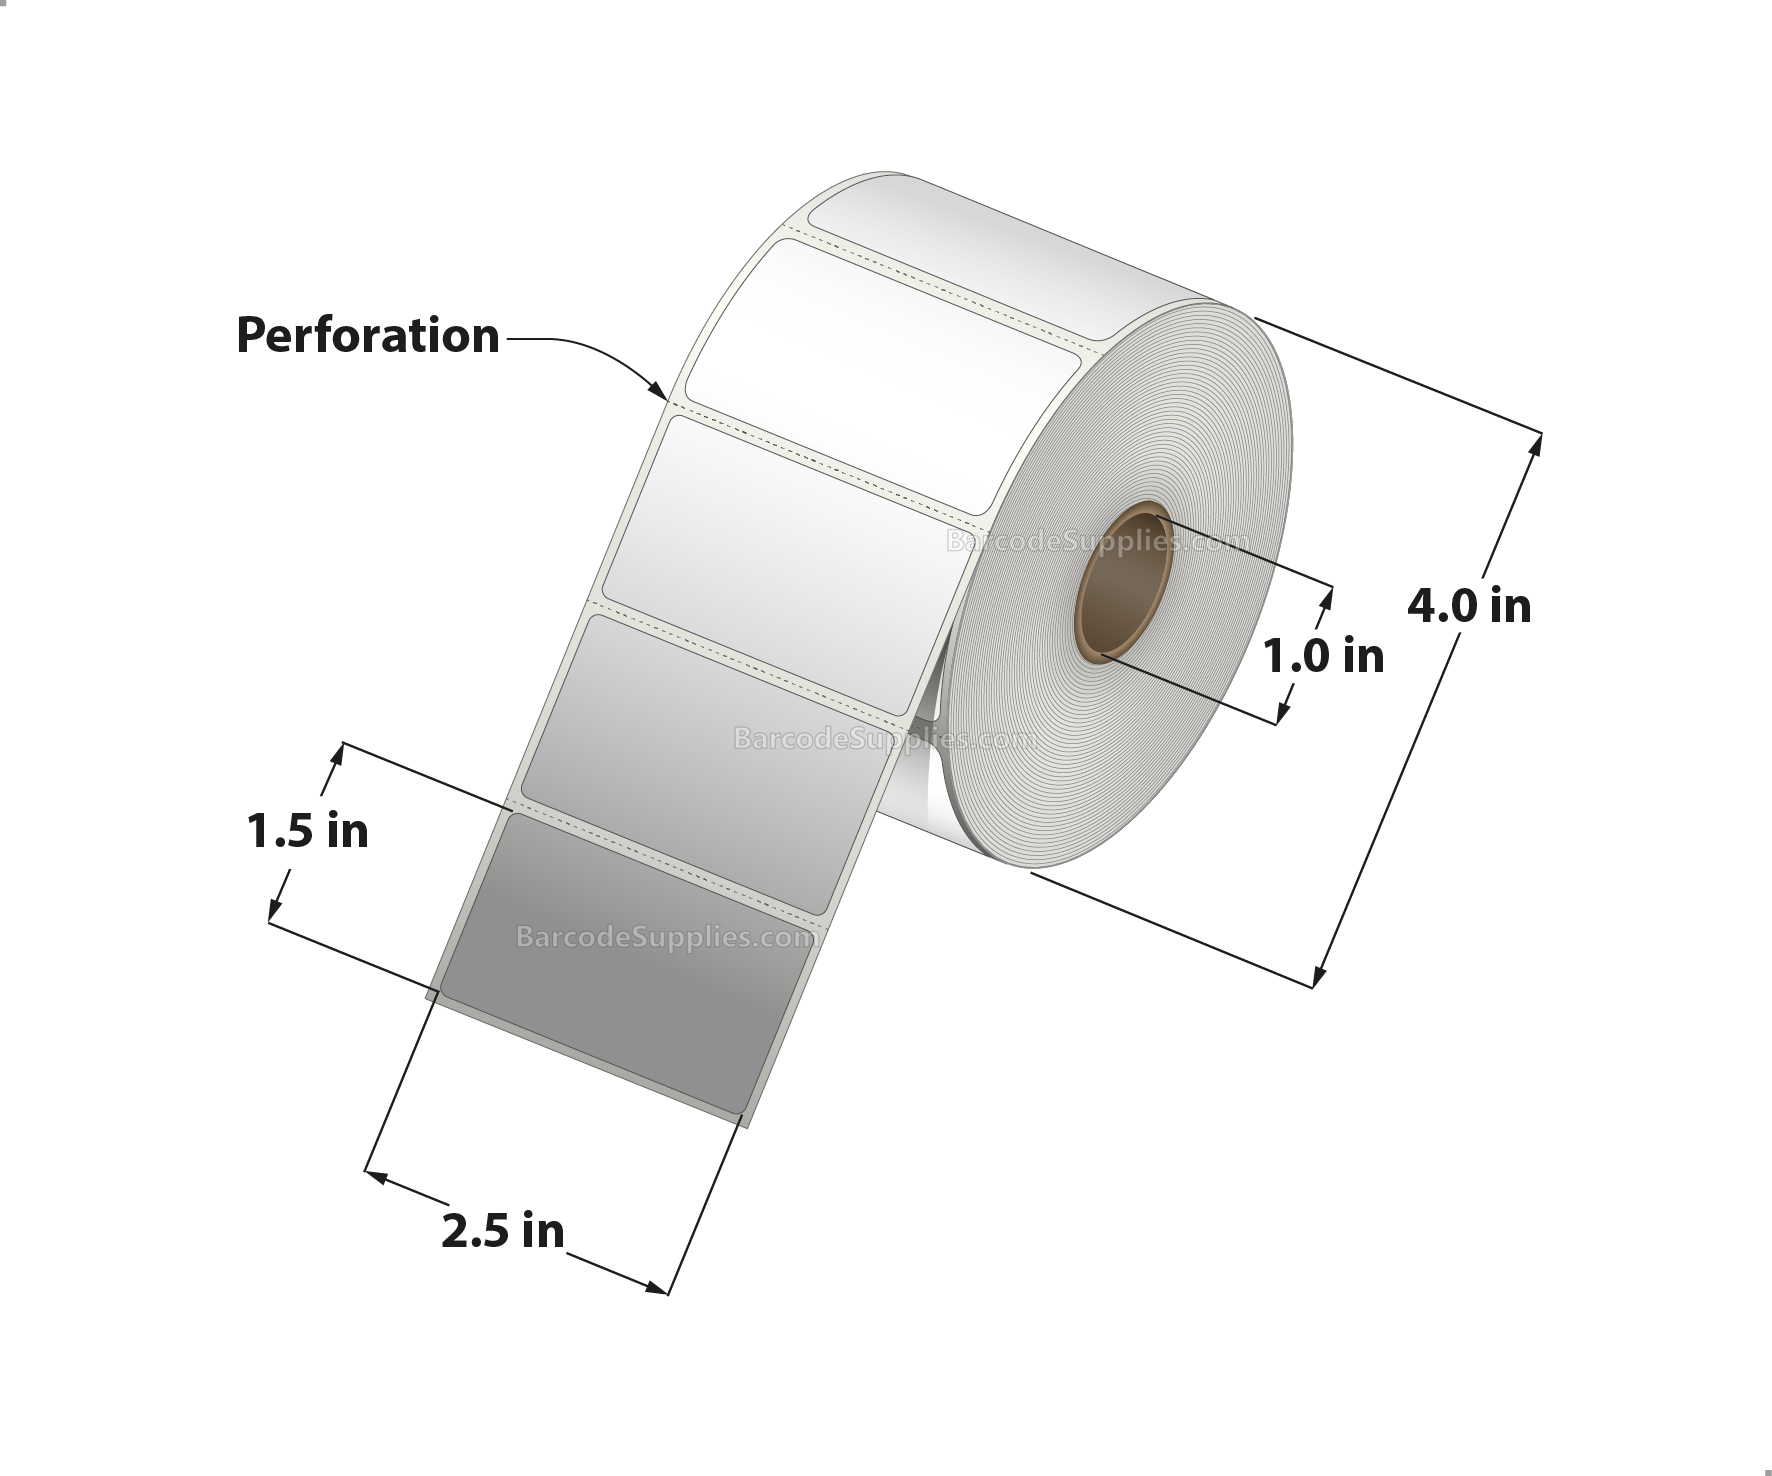 2.5 x 1.5 Direct Thermal White Labels With Acrylic Adhesive - Perforated - 960 Labels Per Roll - Carton Of 12 Rolls - 11520 Labels Total - MPN: RD-25-15-960-1